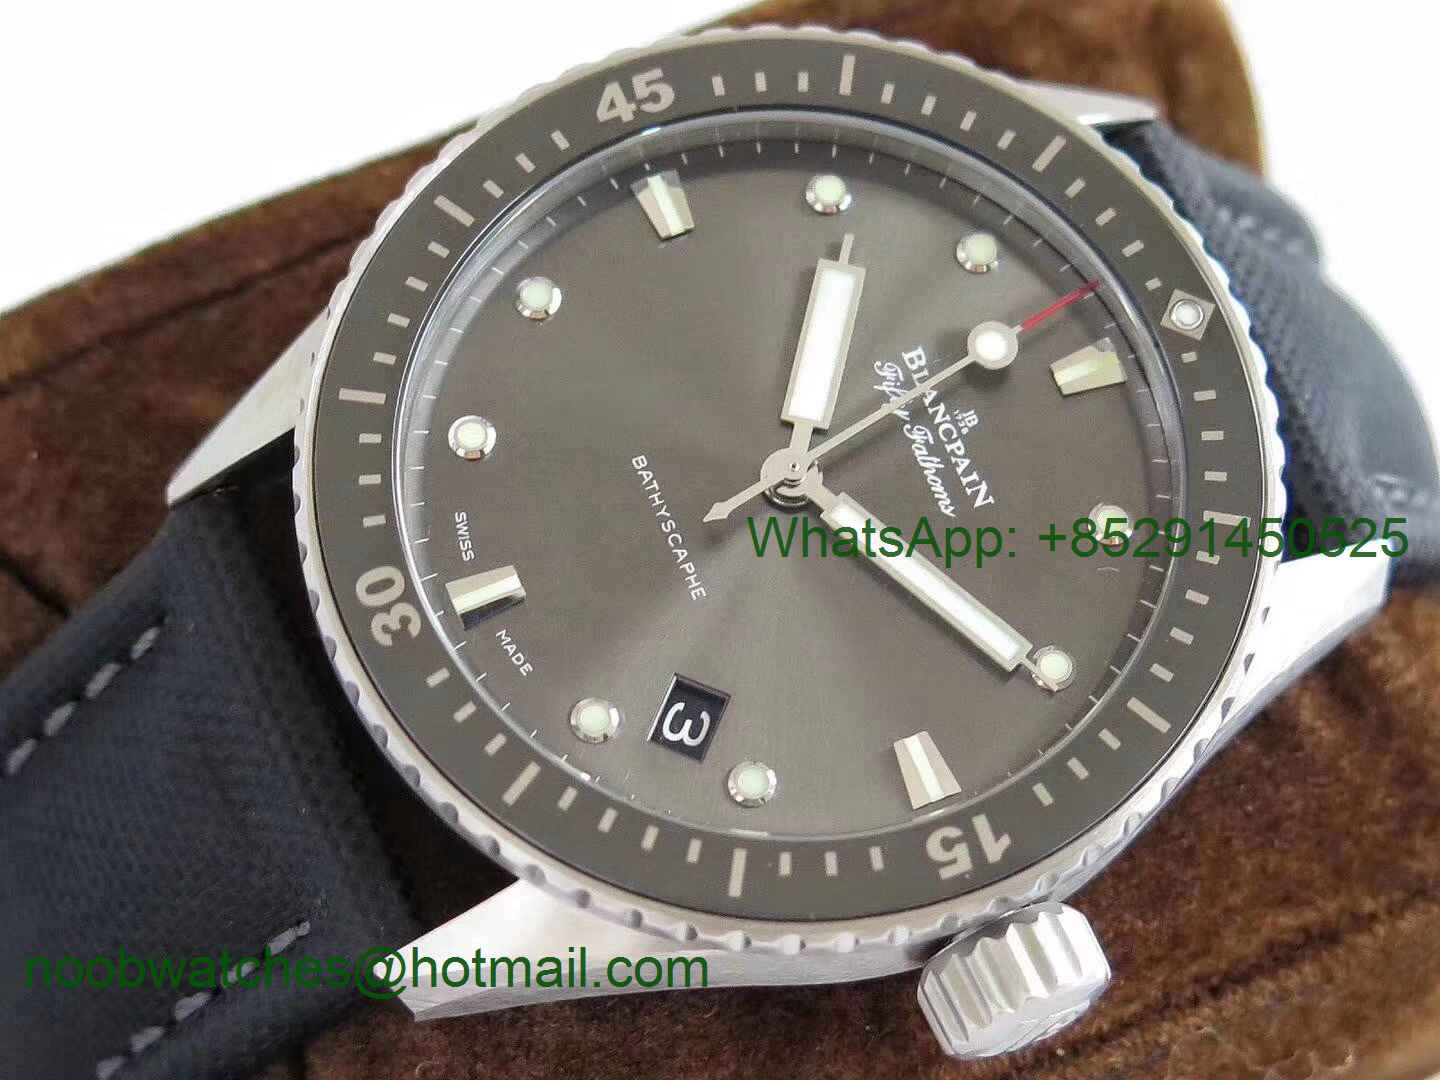 Replica Blancpain Fifty Fathoms Bathyscaphe 43mm SS ZF 1:1 Best Edition Gray Dial A1315